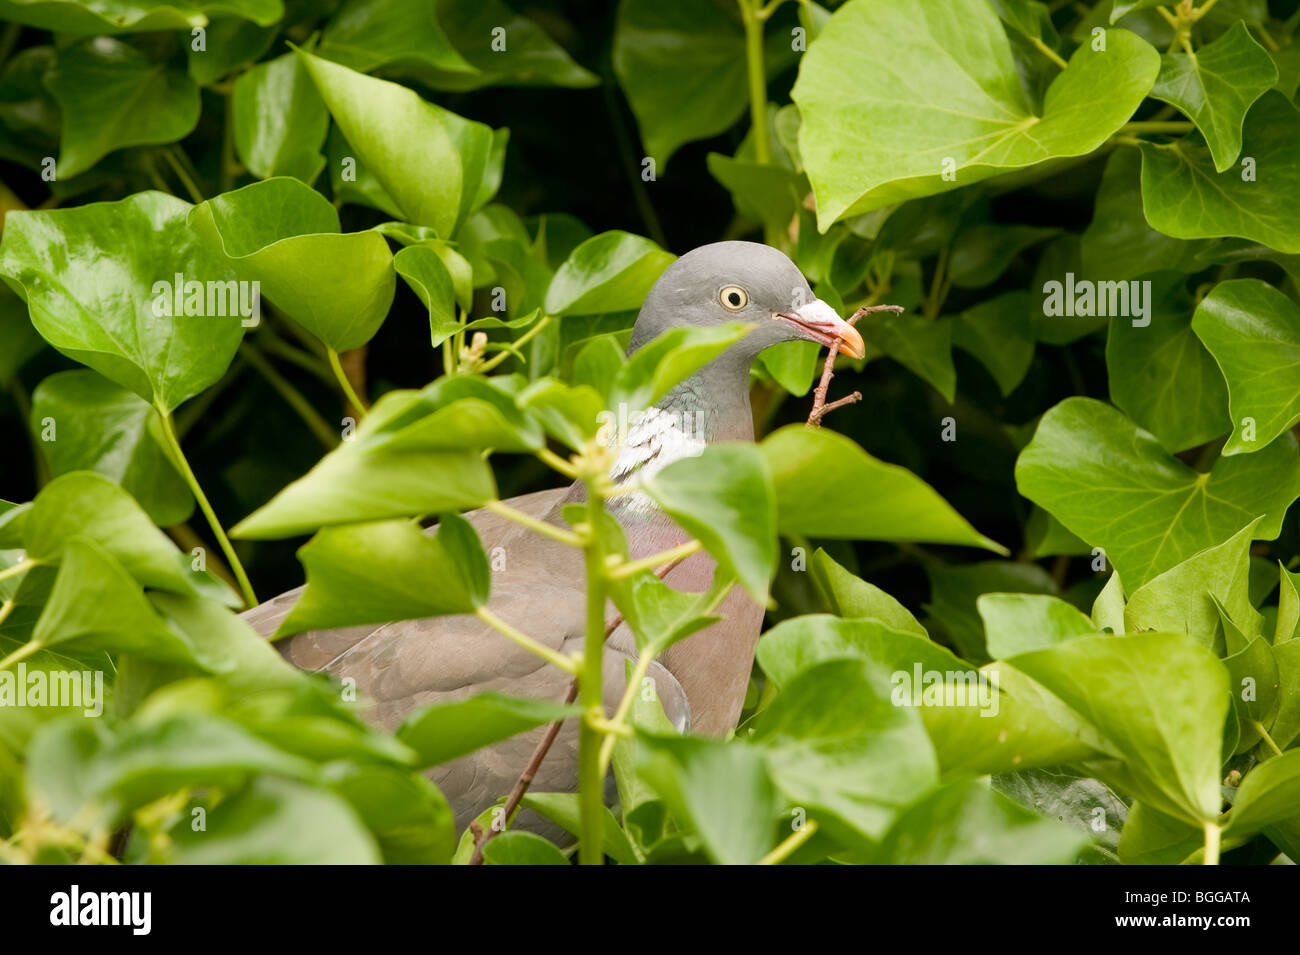 Closeup of a Wood pigeon holding a twig in its beak building a nest in an ivy hedge. Stock Photo